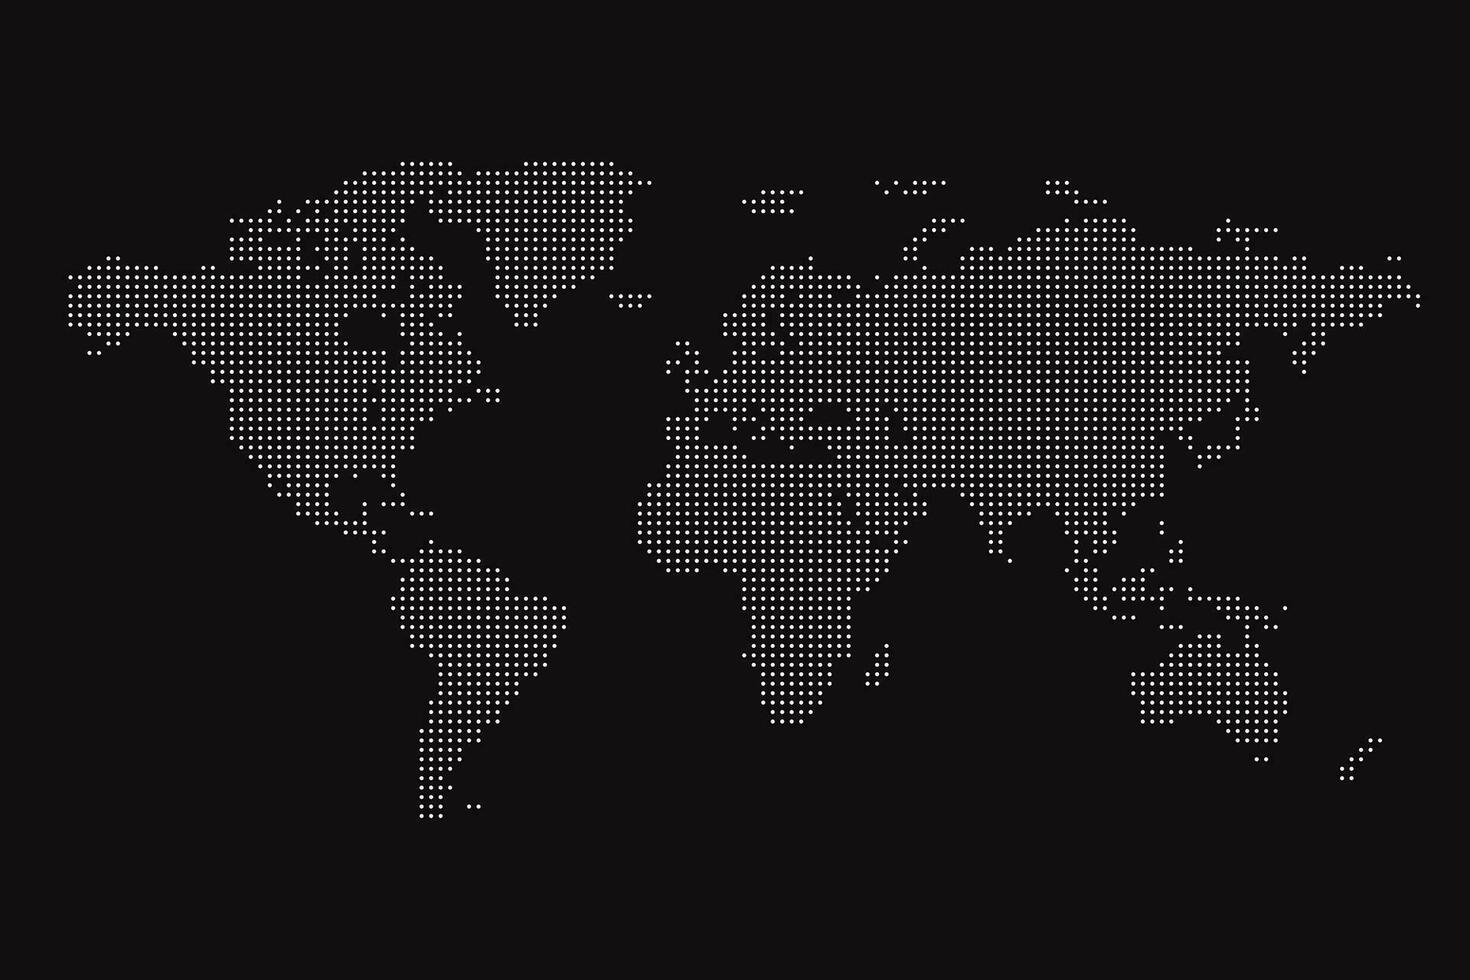 World Map illustration with dotted effect on dark isolated background vector